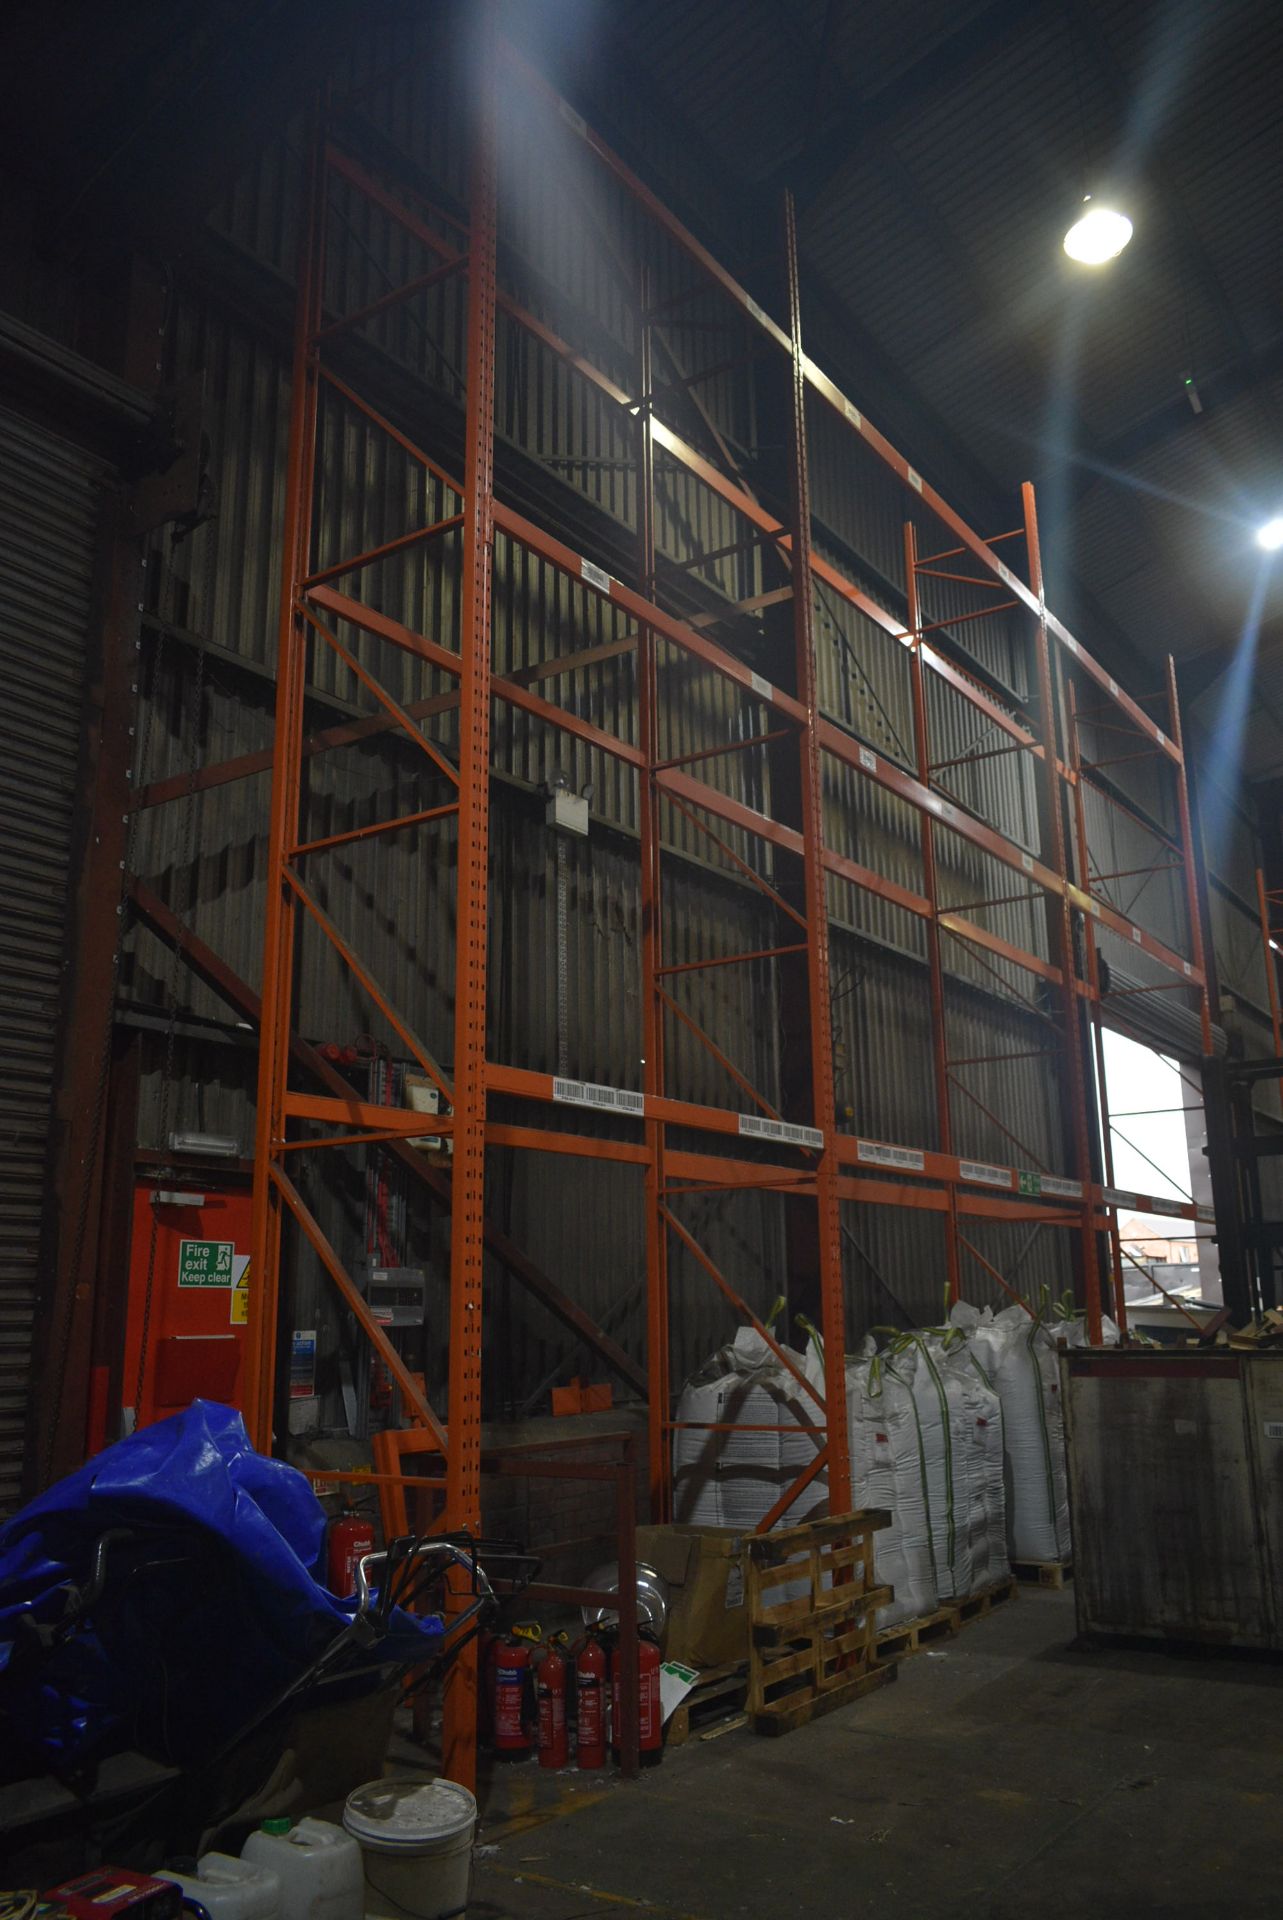 Redirack HD20T THREE BAY SINGLE SIDED THREE TIER PALLET RACK, comprising four end frames, mainly 1.